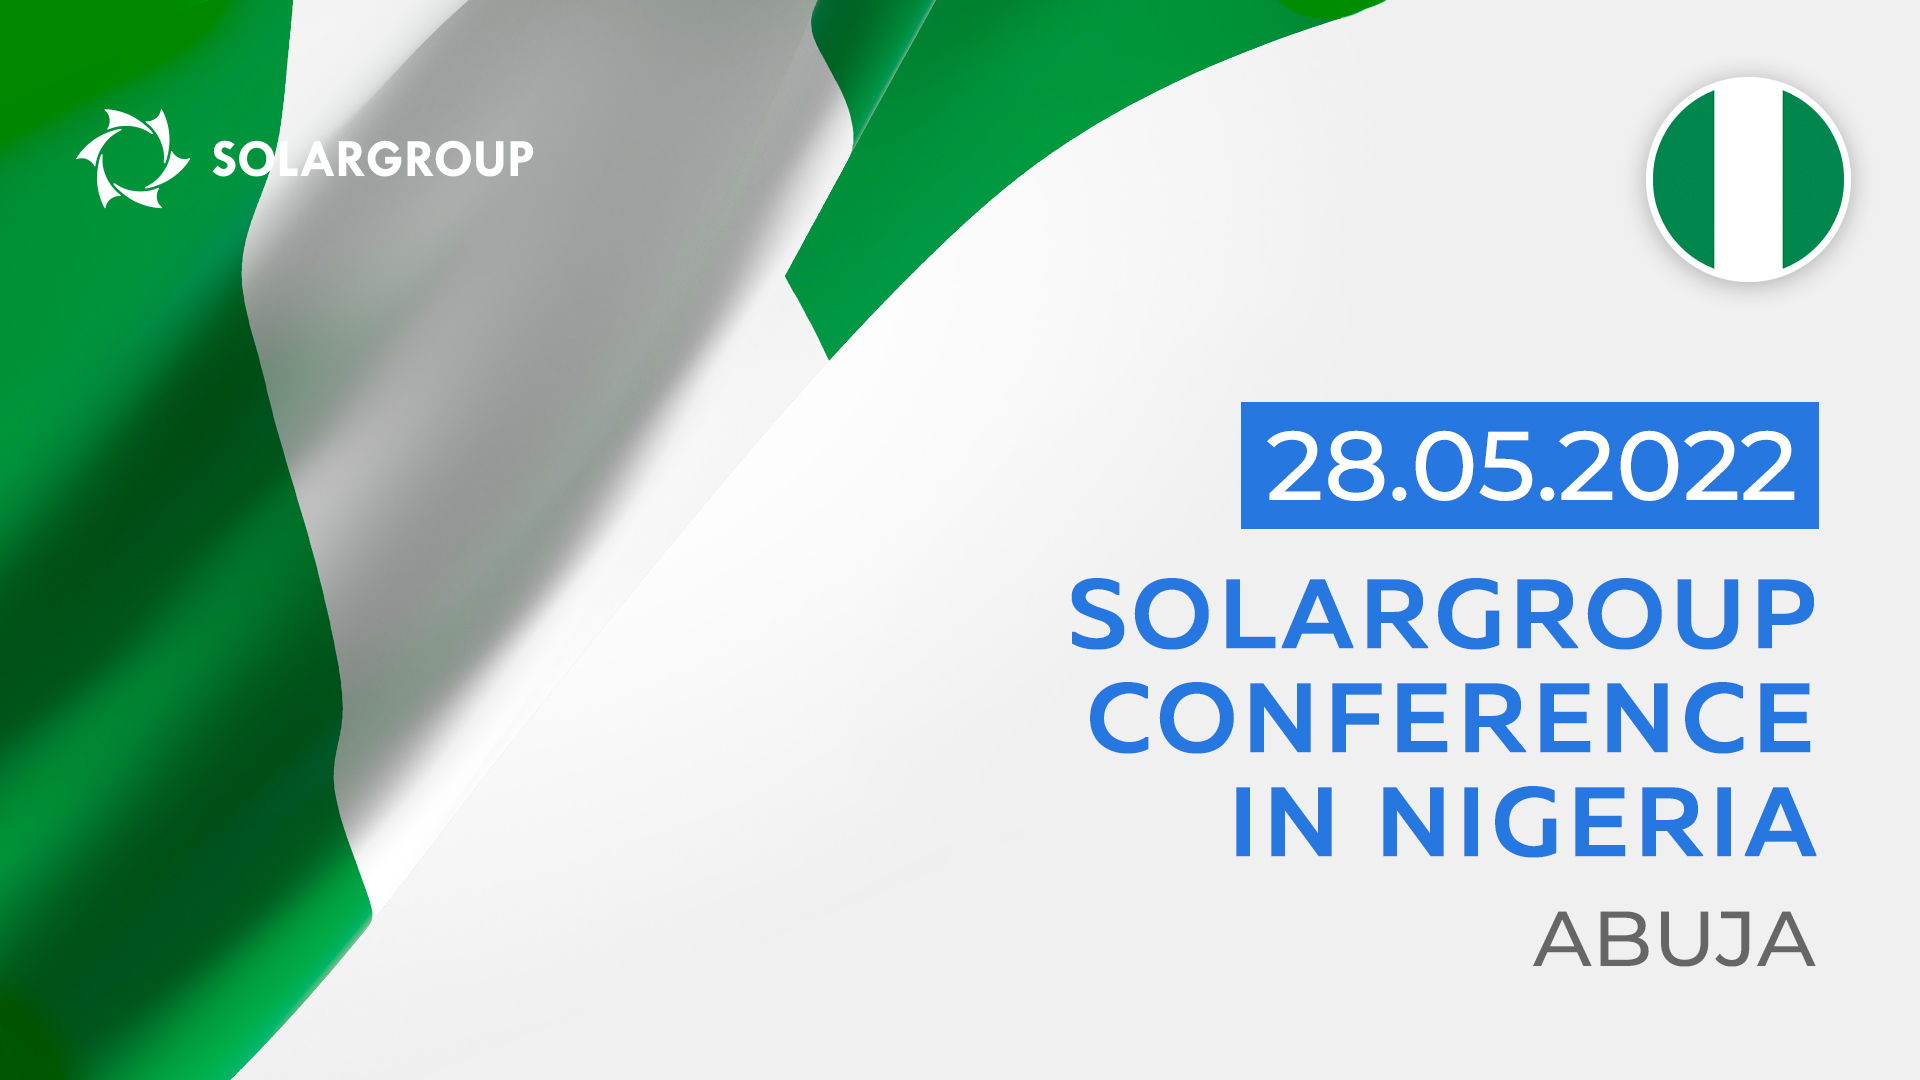 Tomorrow already! SOLARGROUP conference in Nigeria